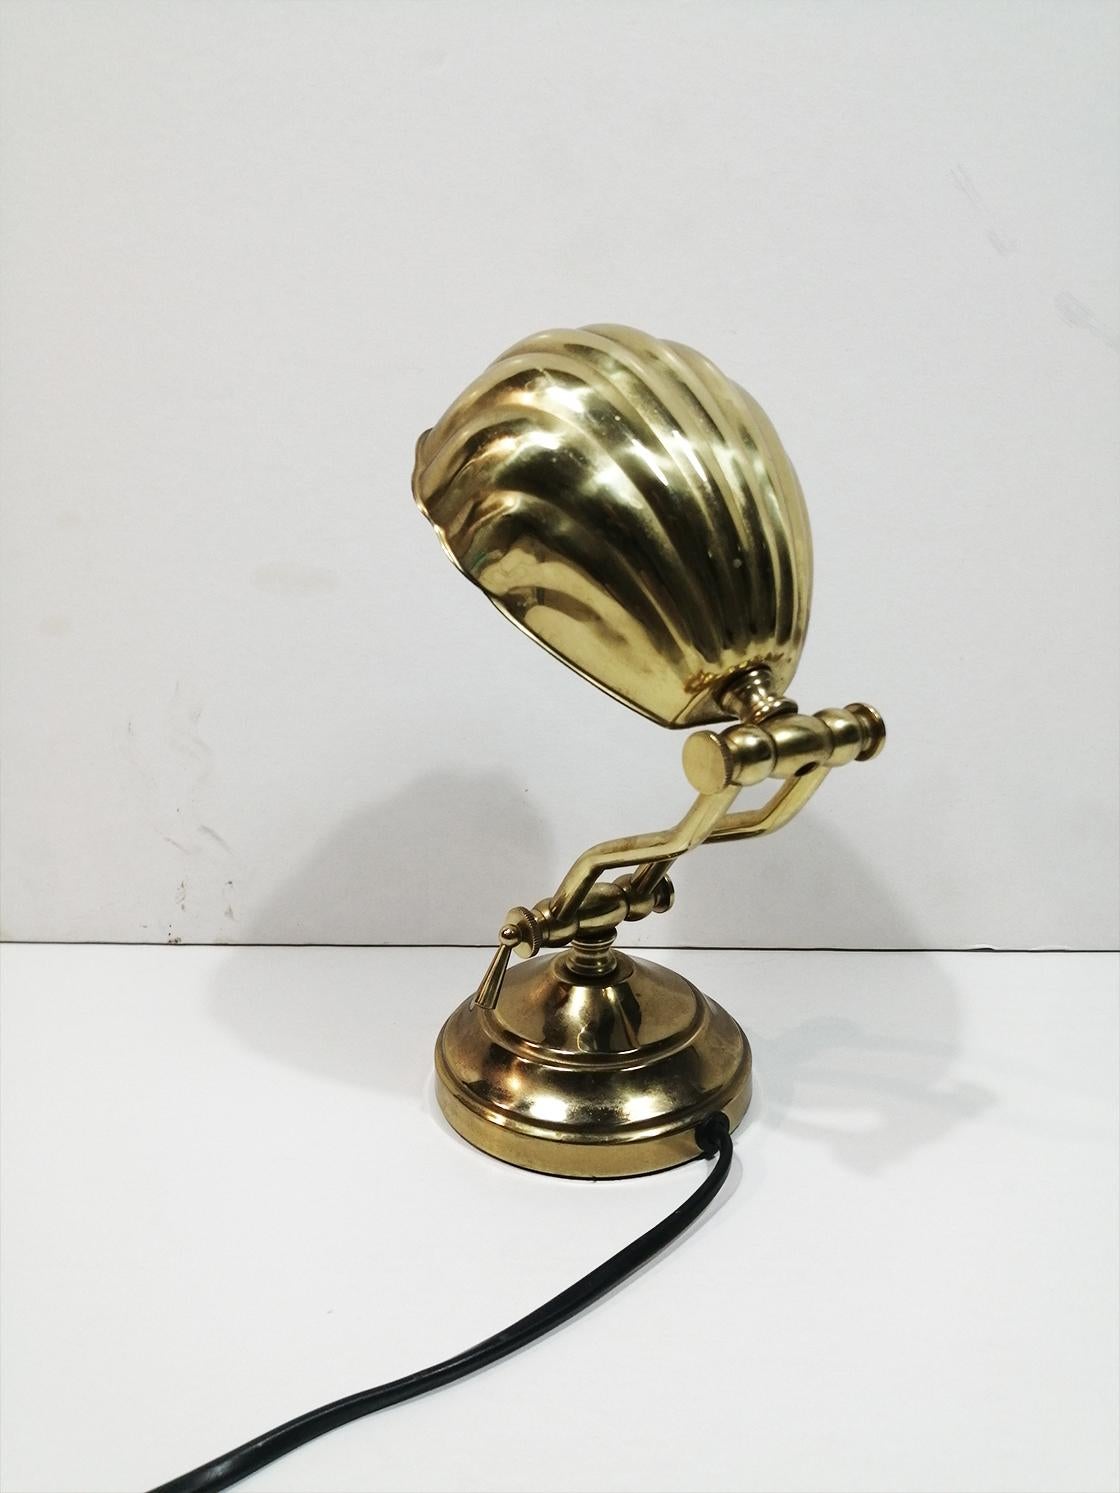   
Beautiful smal brass table lamp, flexo type shell-shaped
              
Lamp for office, reading or for bedside table

It is as seen in the images, small size


  